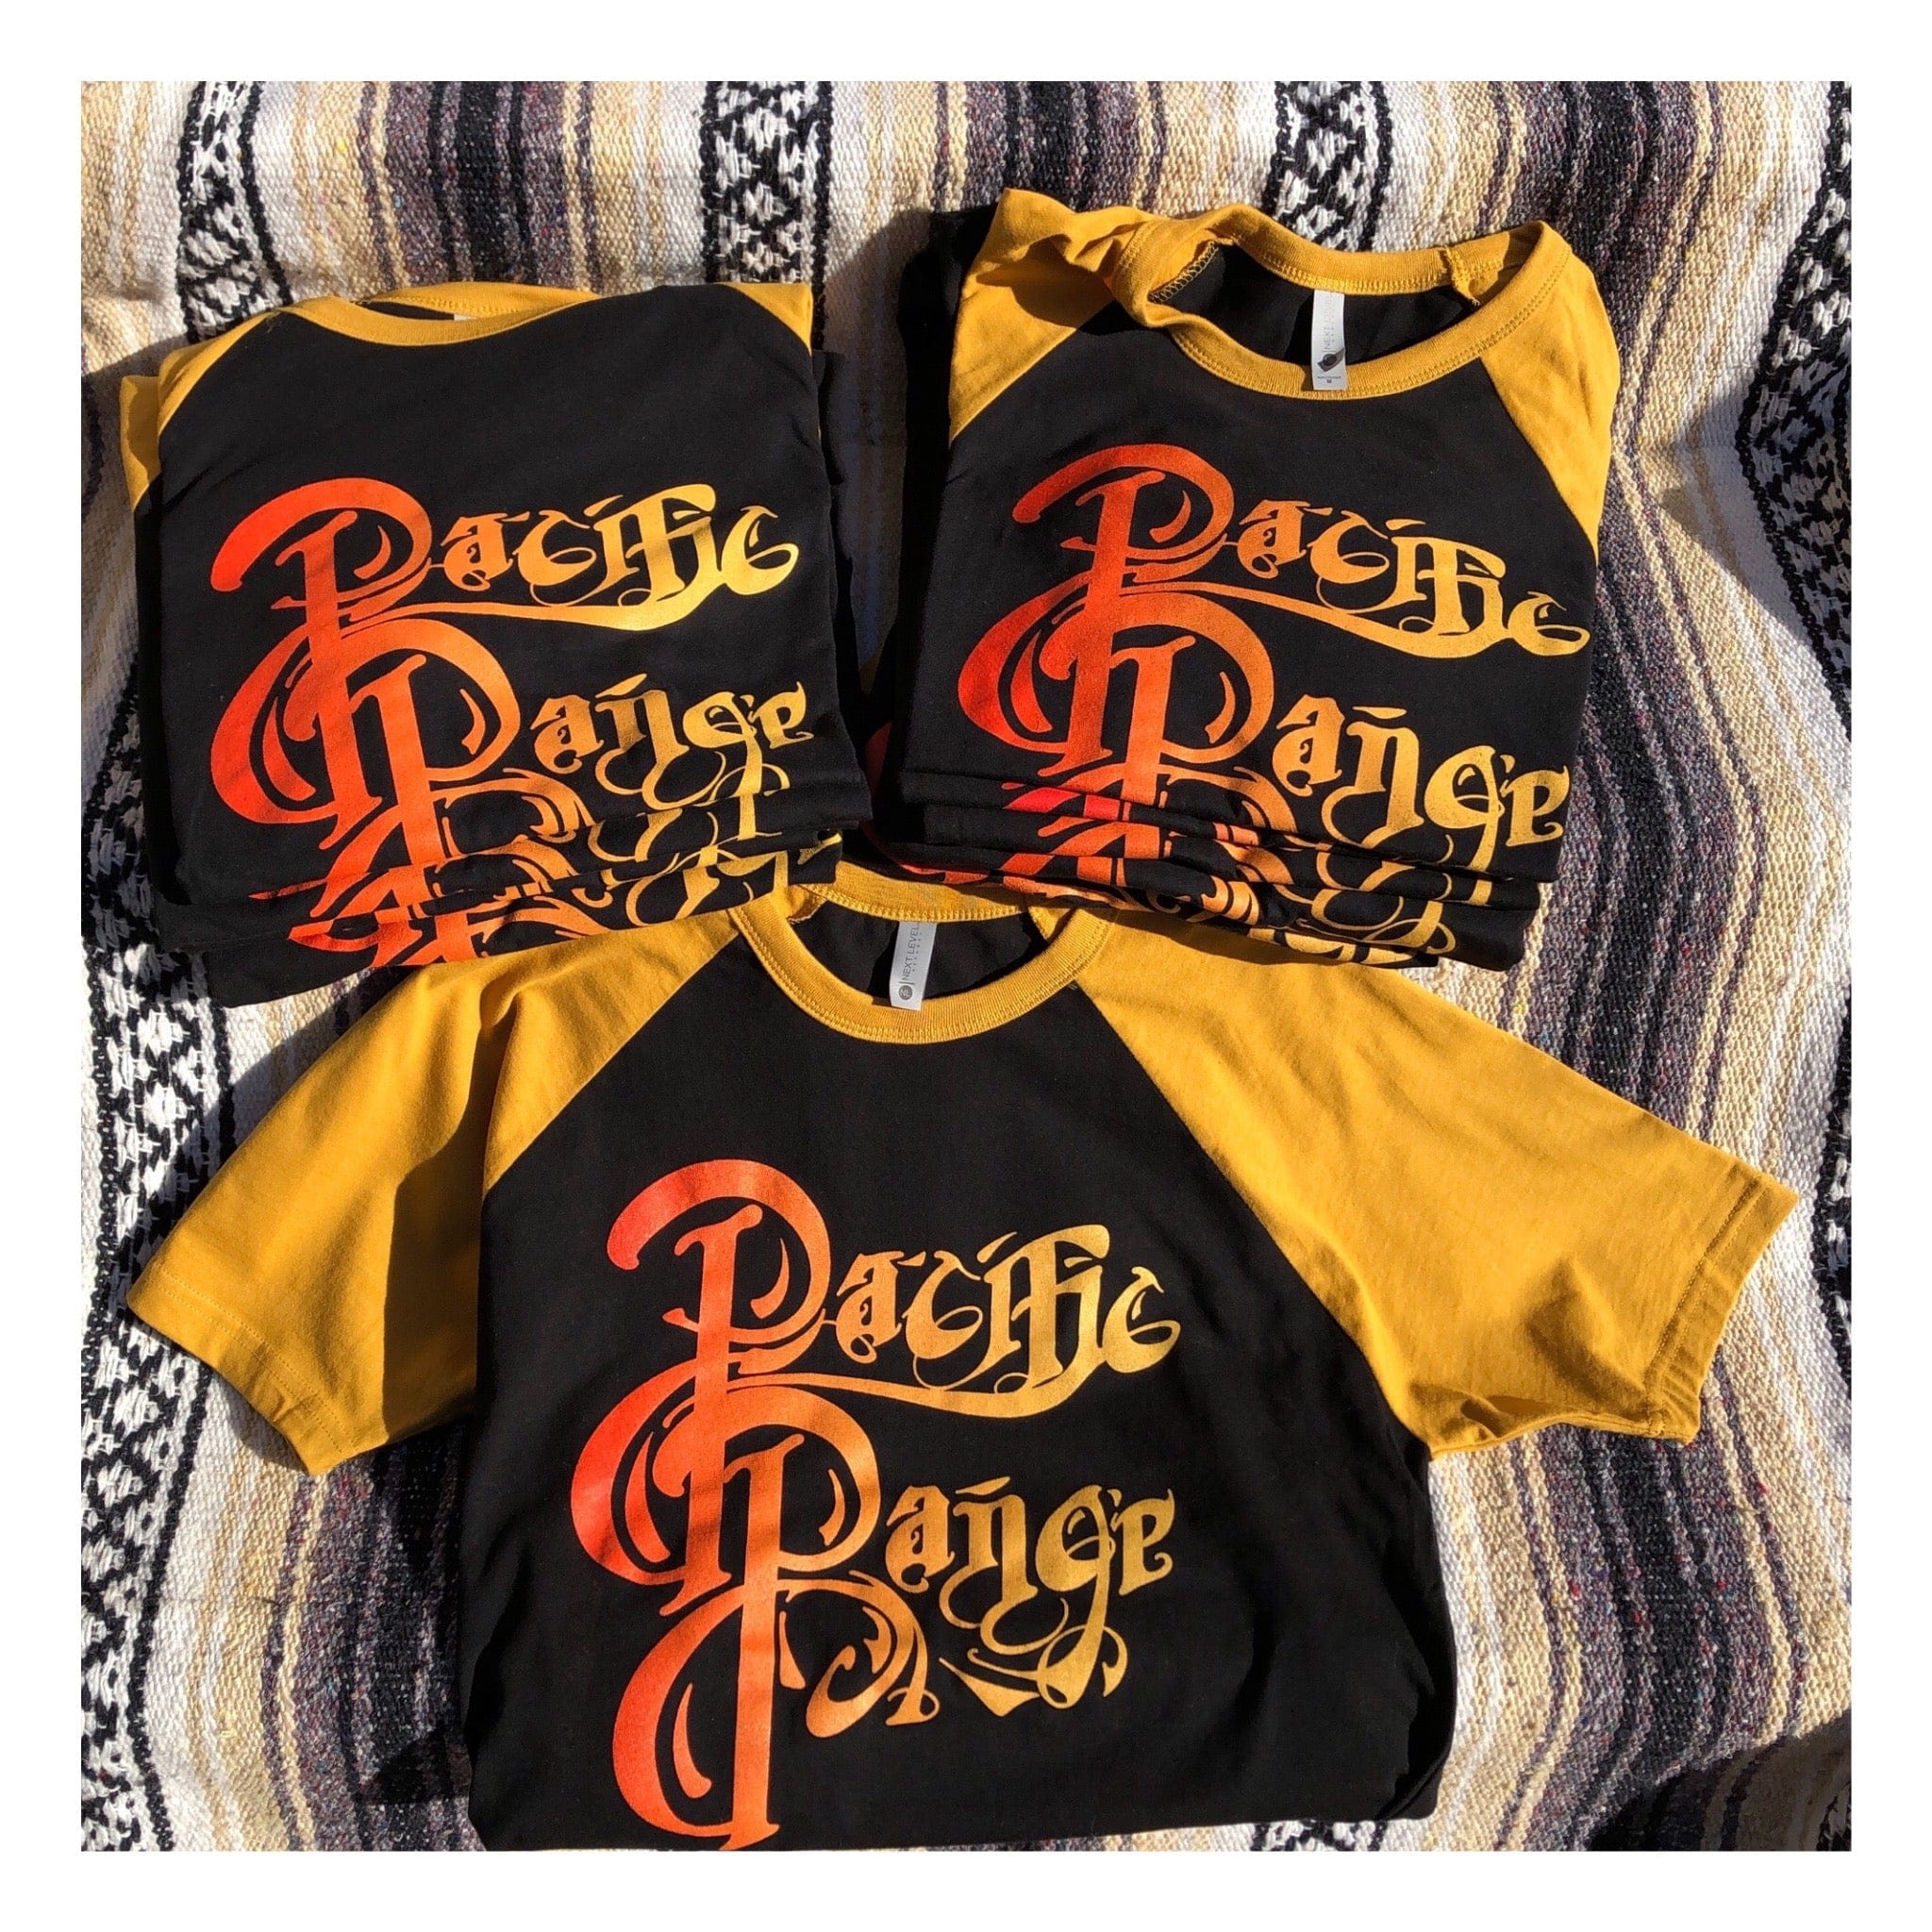 Pacific Range Sunset Shirt - Curation Records (4317913120850)